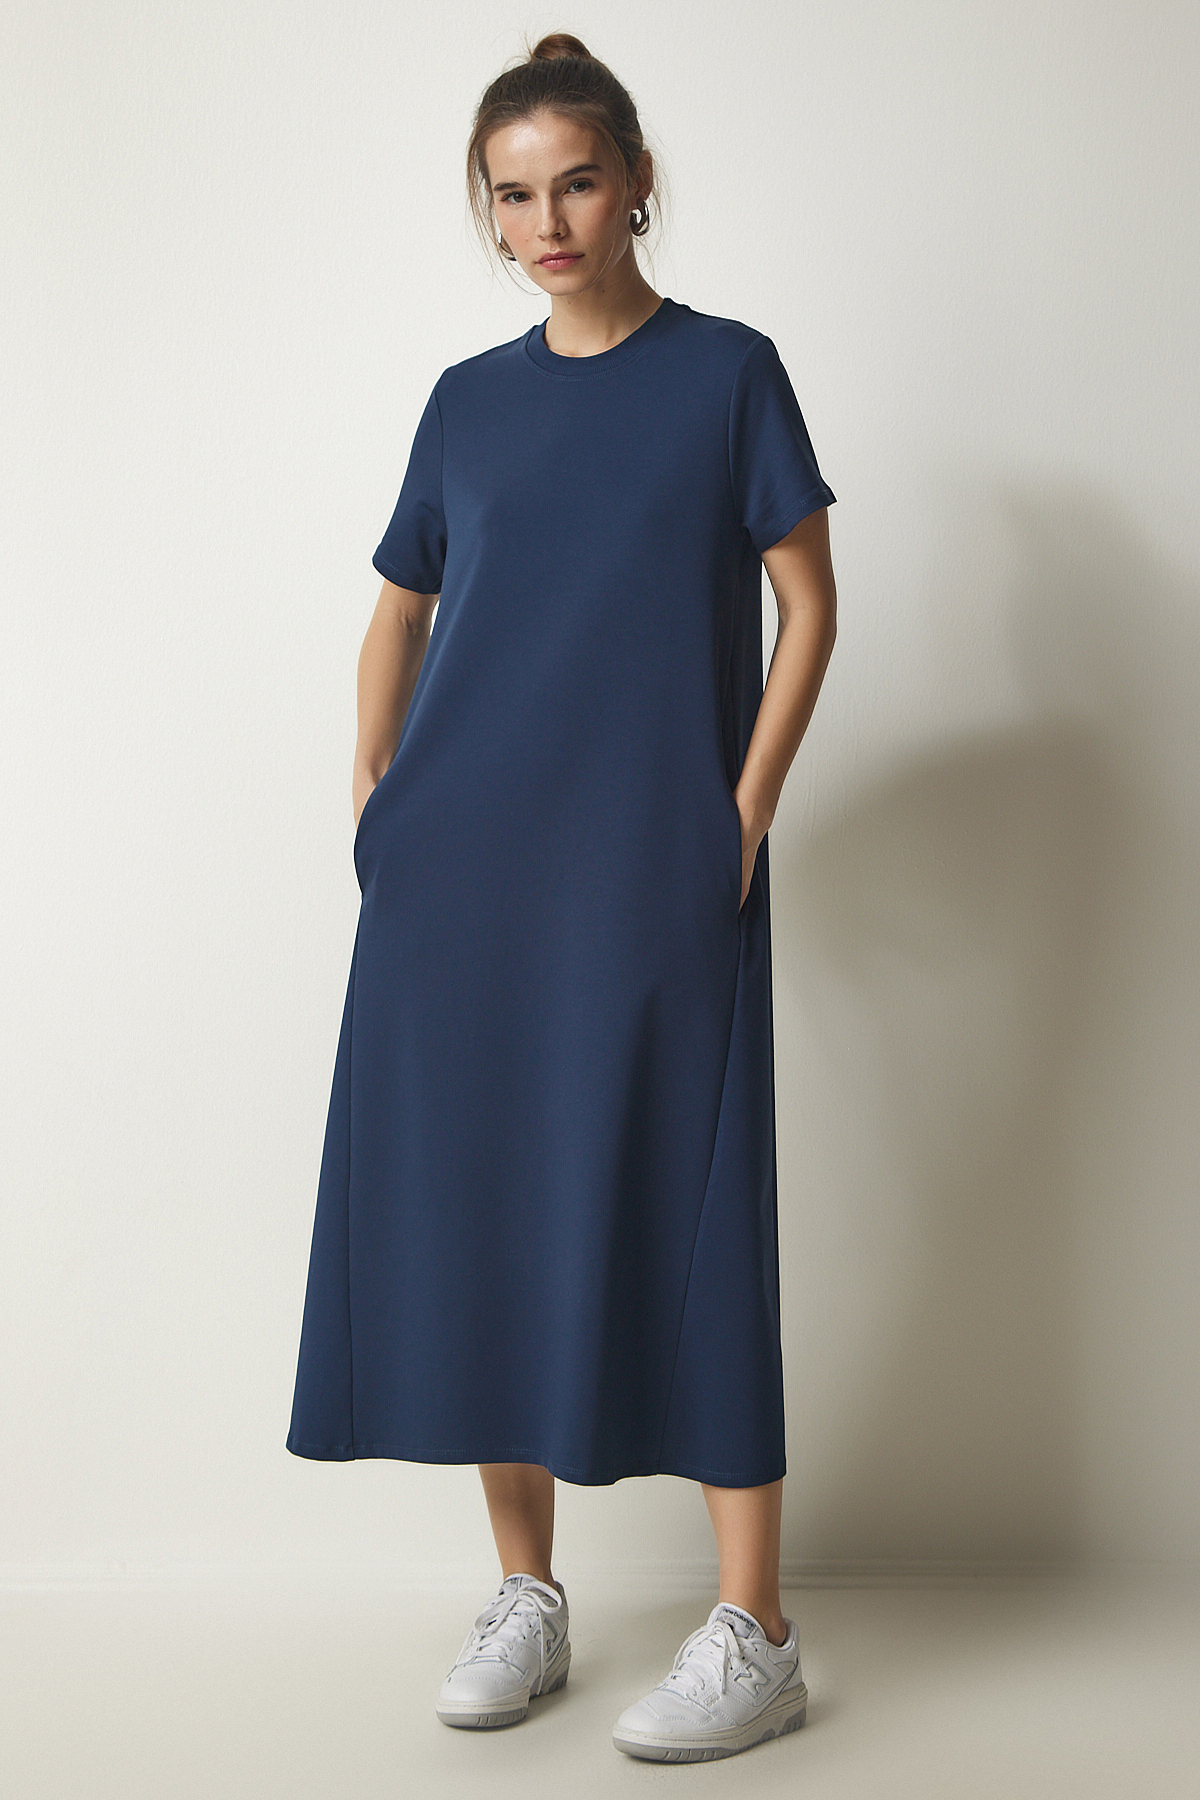 Happiness İstanbul Women's Navy Blue A-Line Summer Combed Cotton Dress